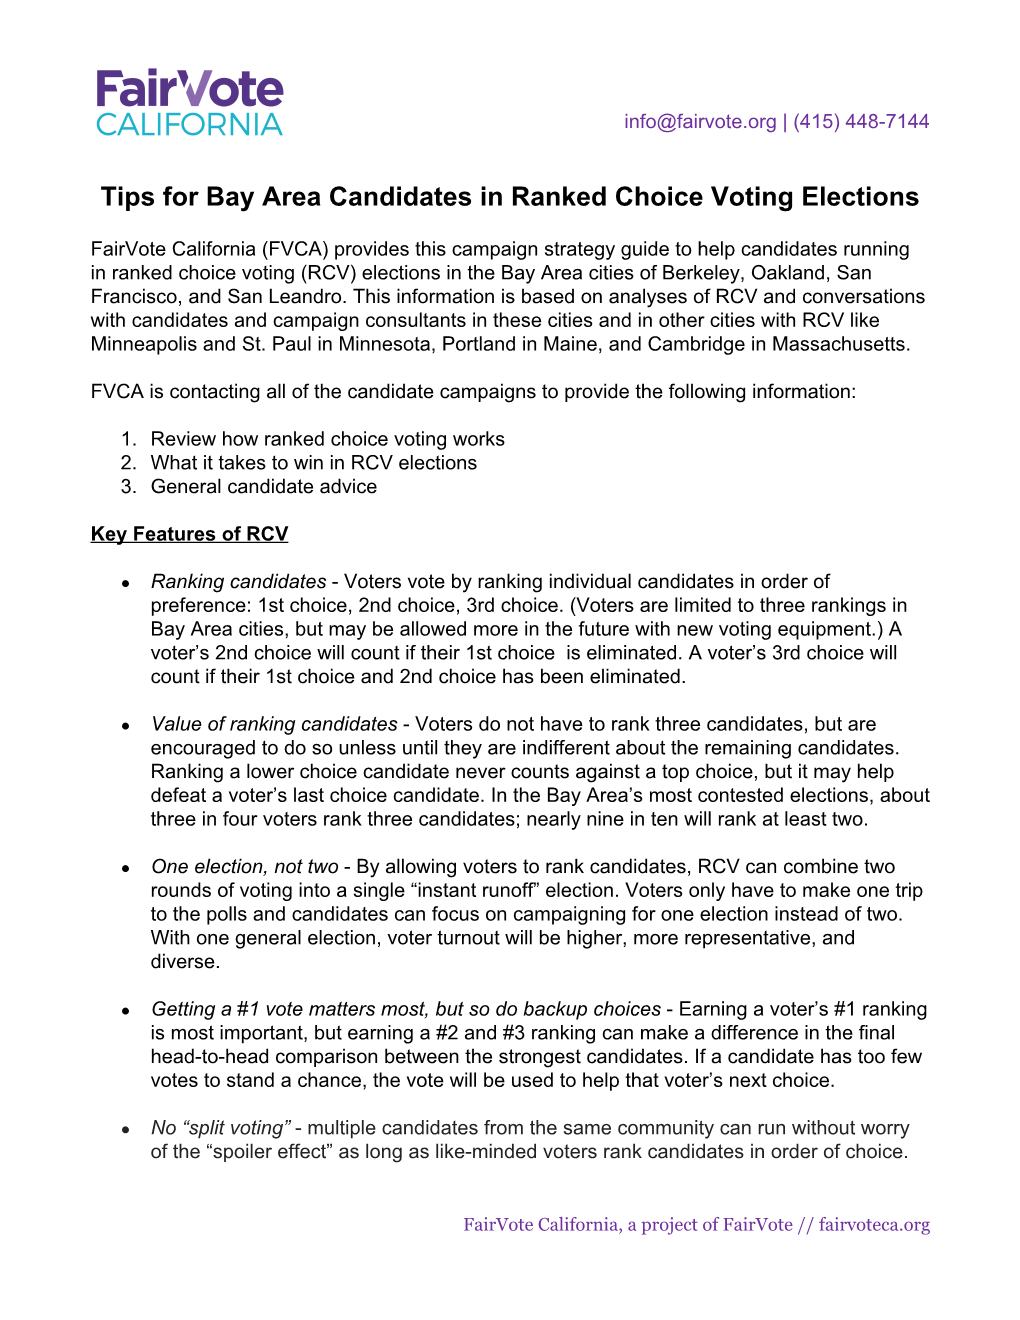 Tips for Bay Area Candidates in Ranked Choice Voting Elections